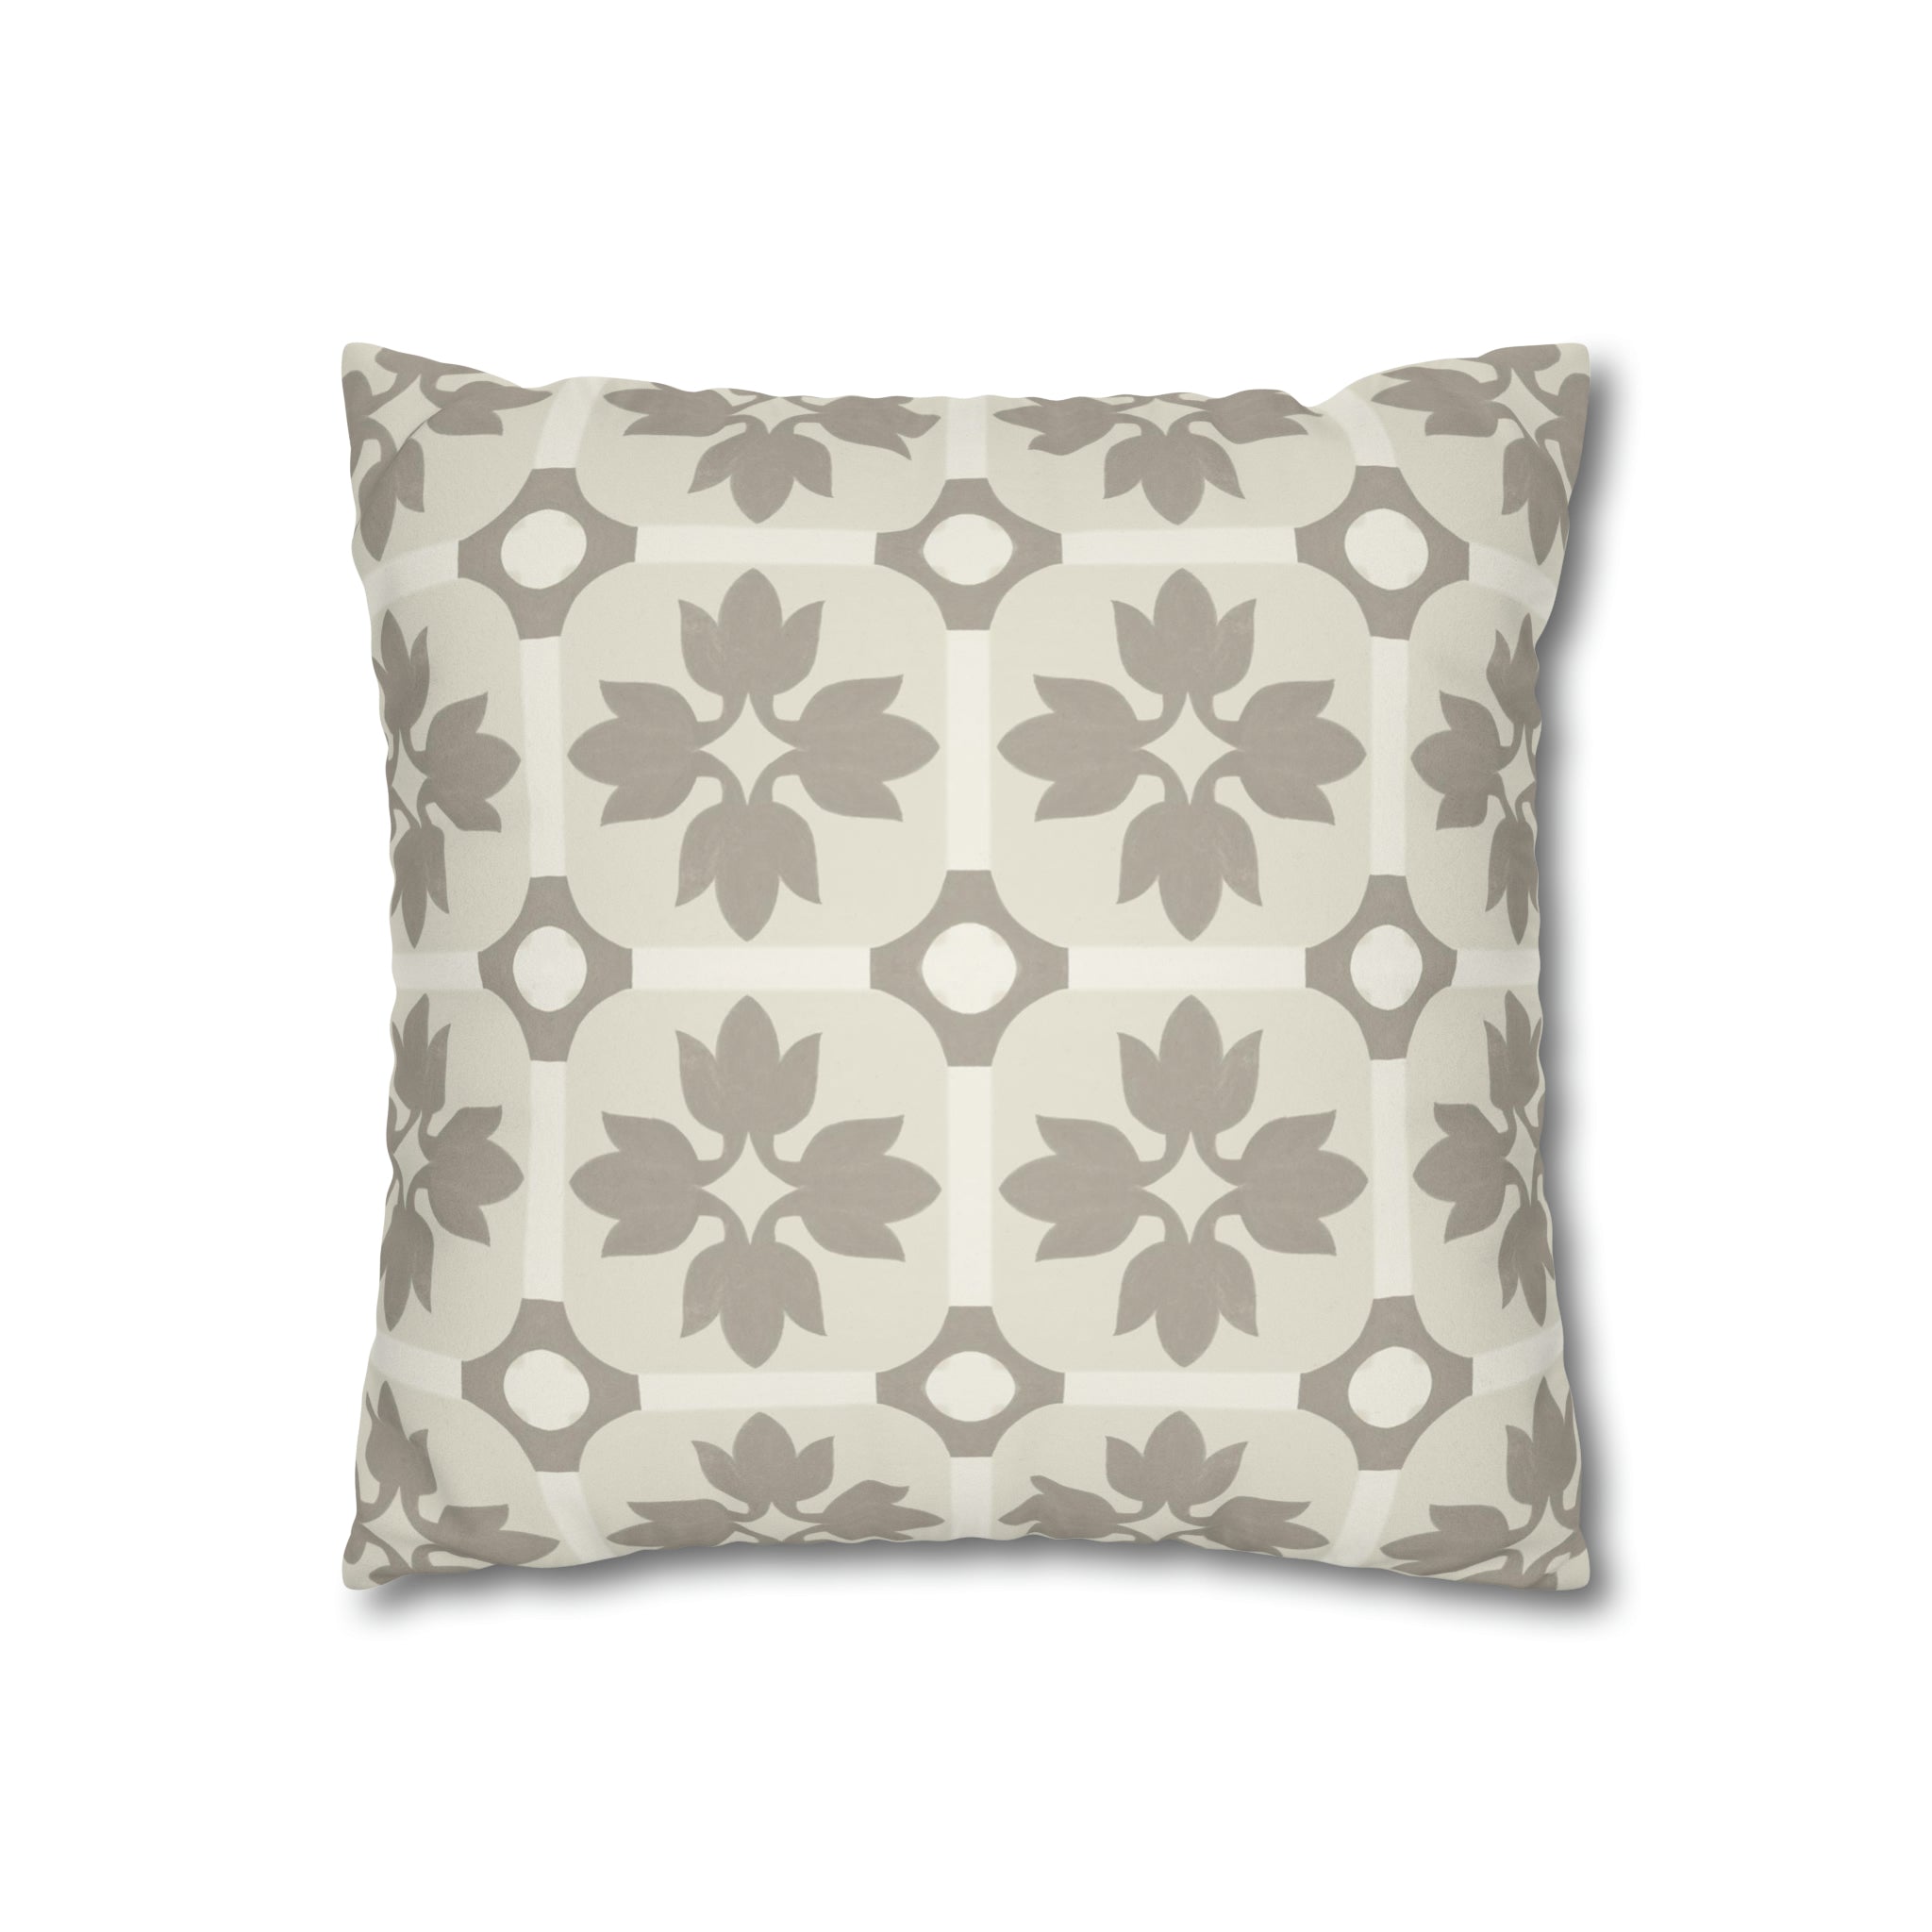 Margot Taupe Microsuede Square Pillow Cover